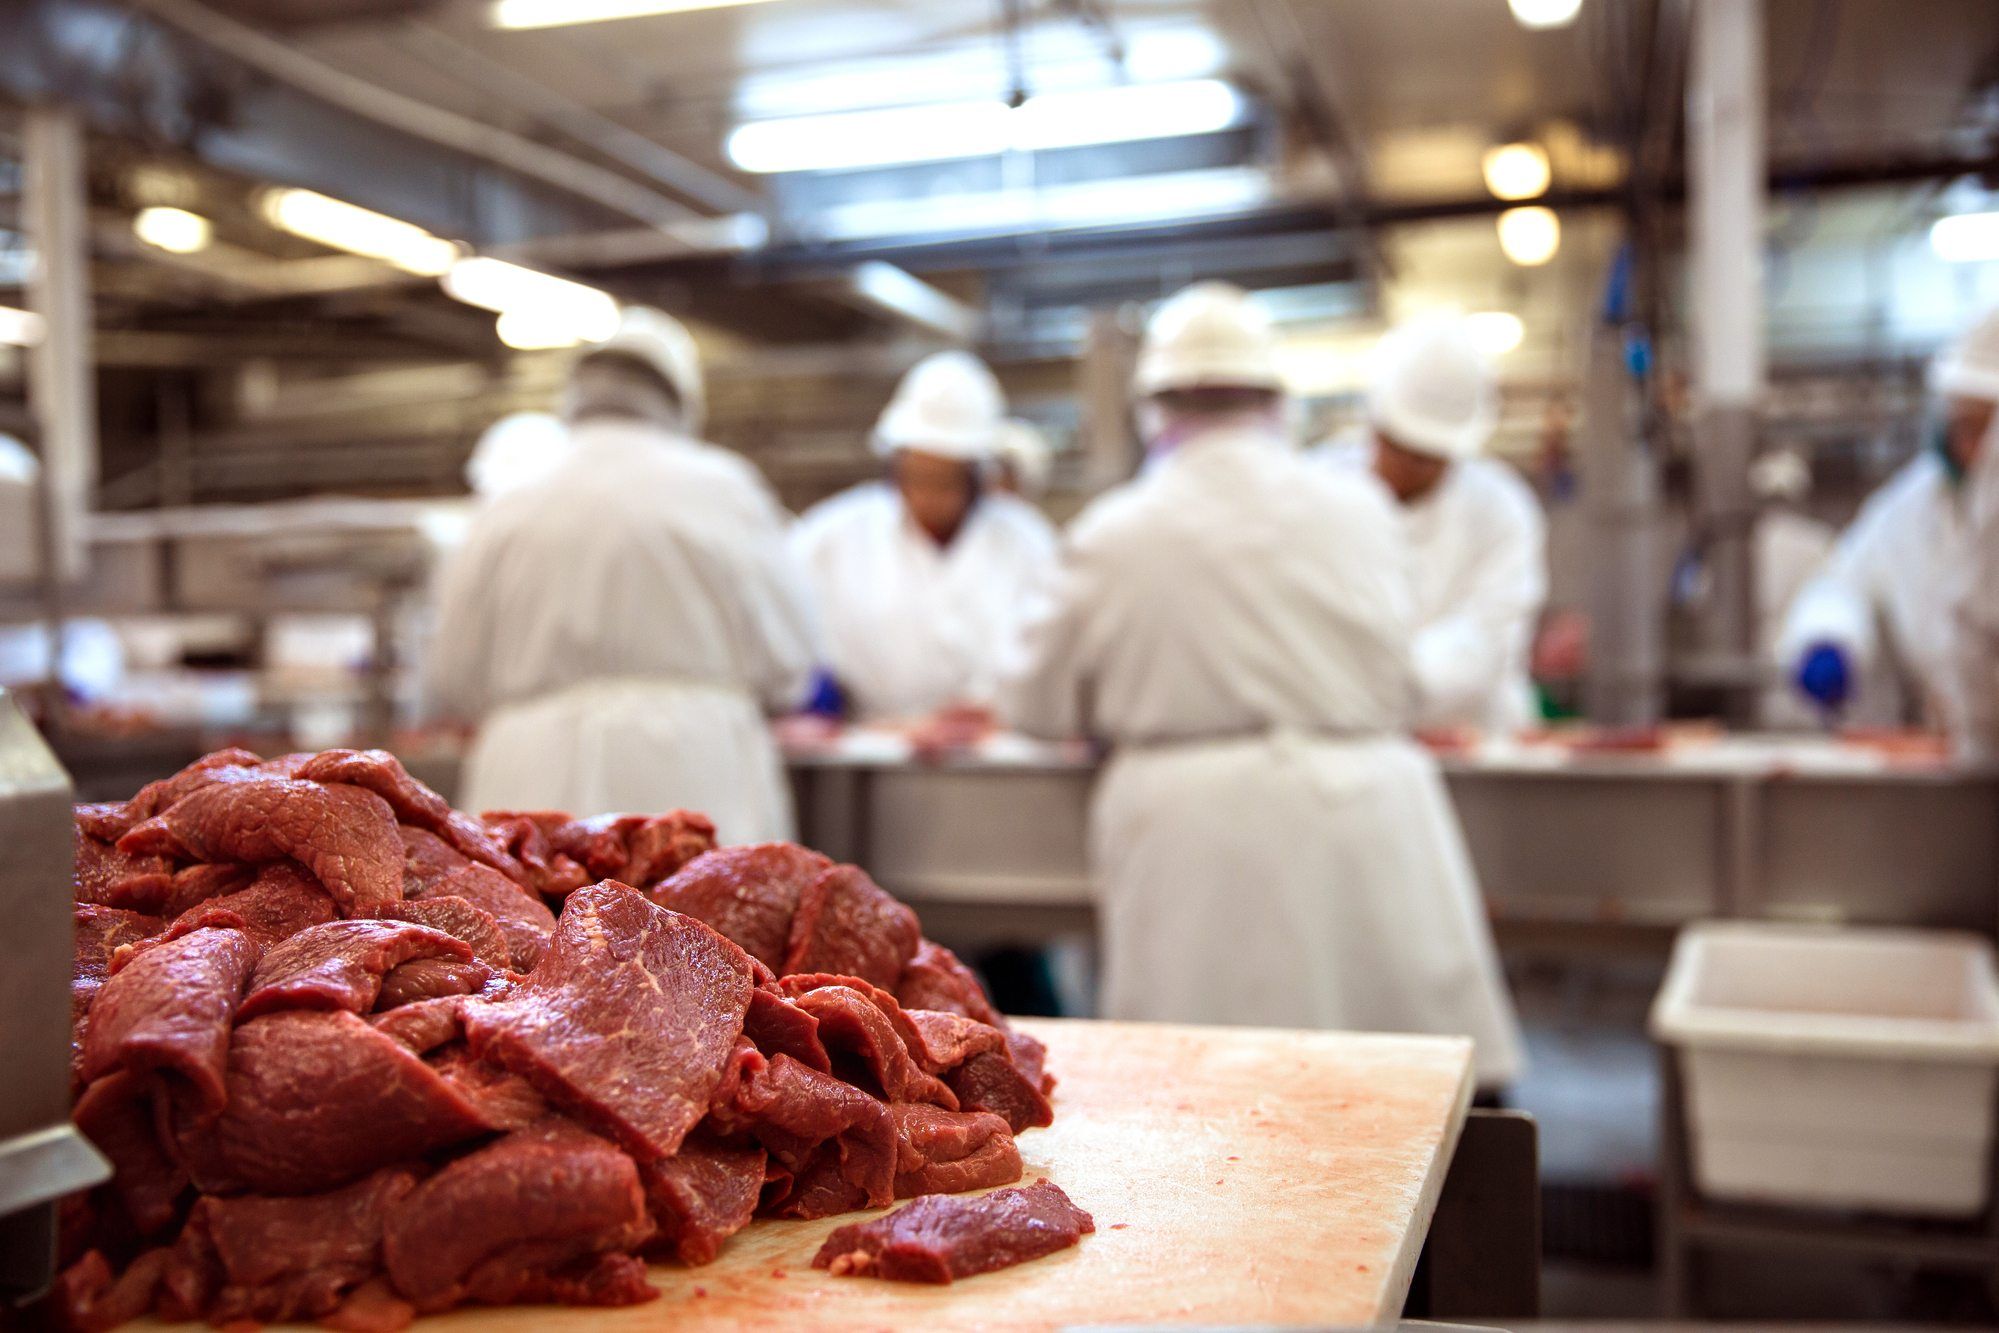 MEat packing workers regarding the Cargill COVID-19 class action lawsuit filed